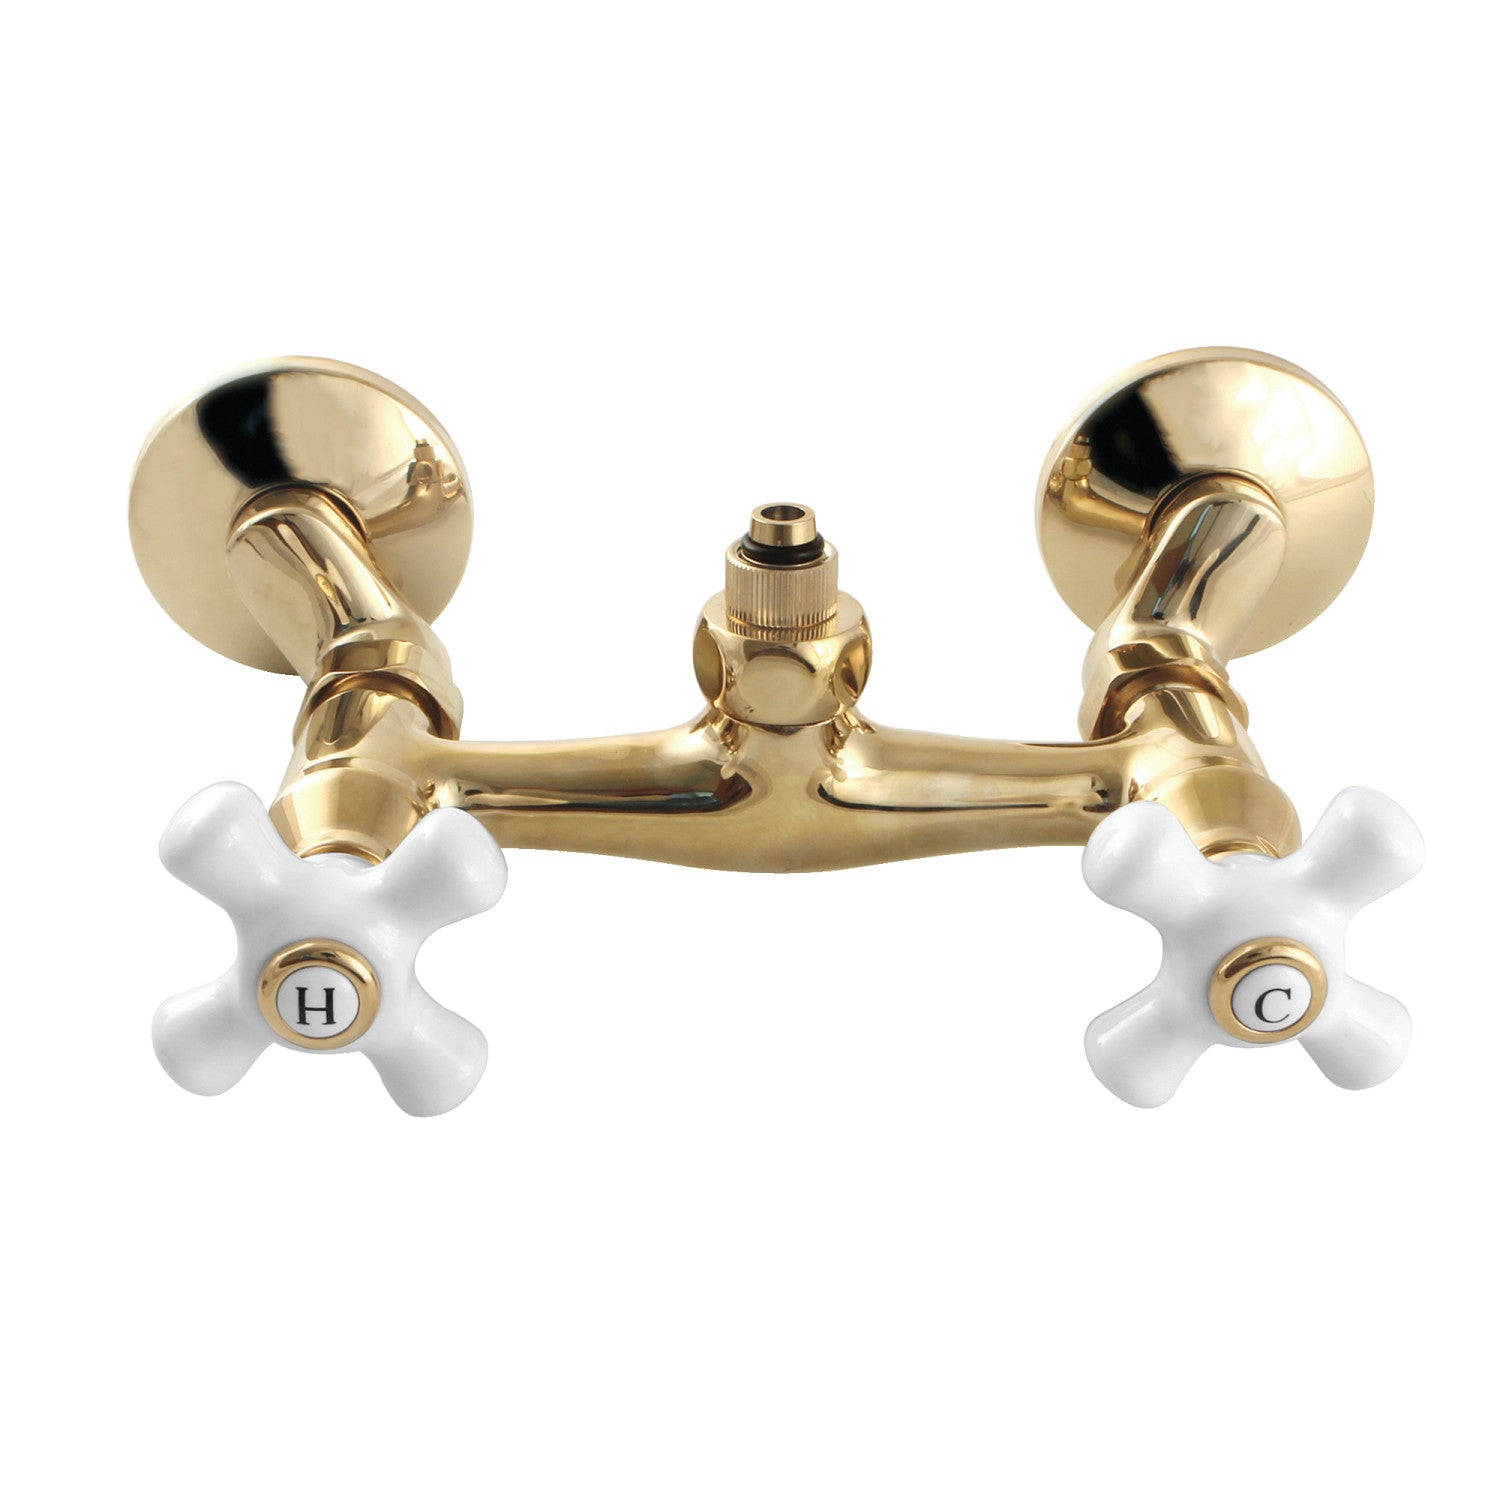 Kingston Brass Vintage CC2132PX Wall-Mount Tub Filler Faucet with Riser  Adapter, Poli